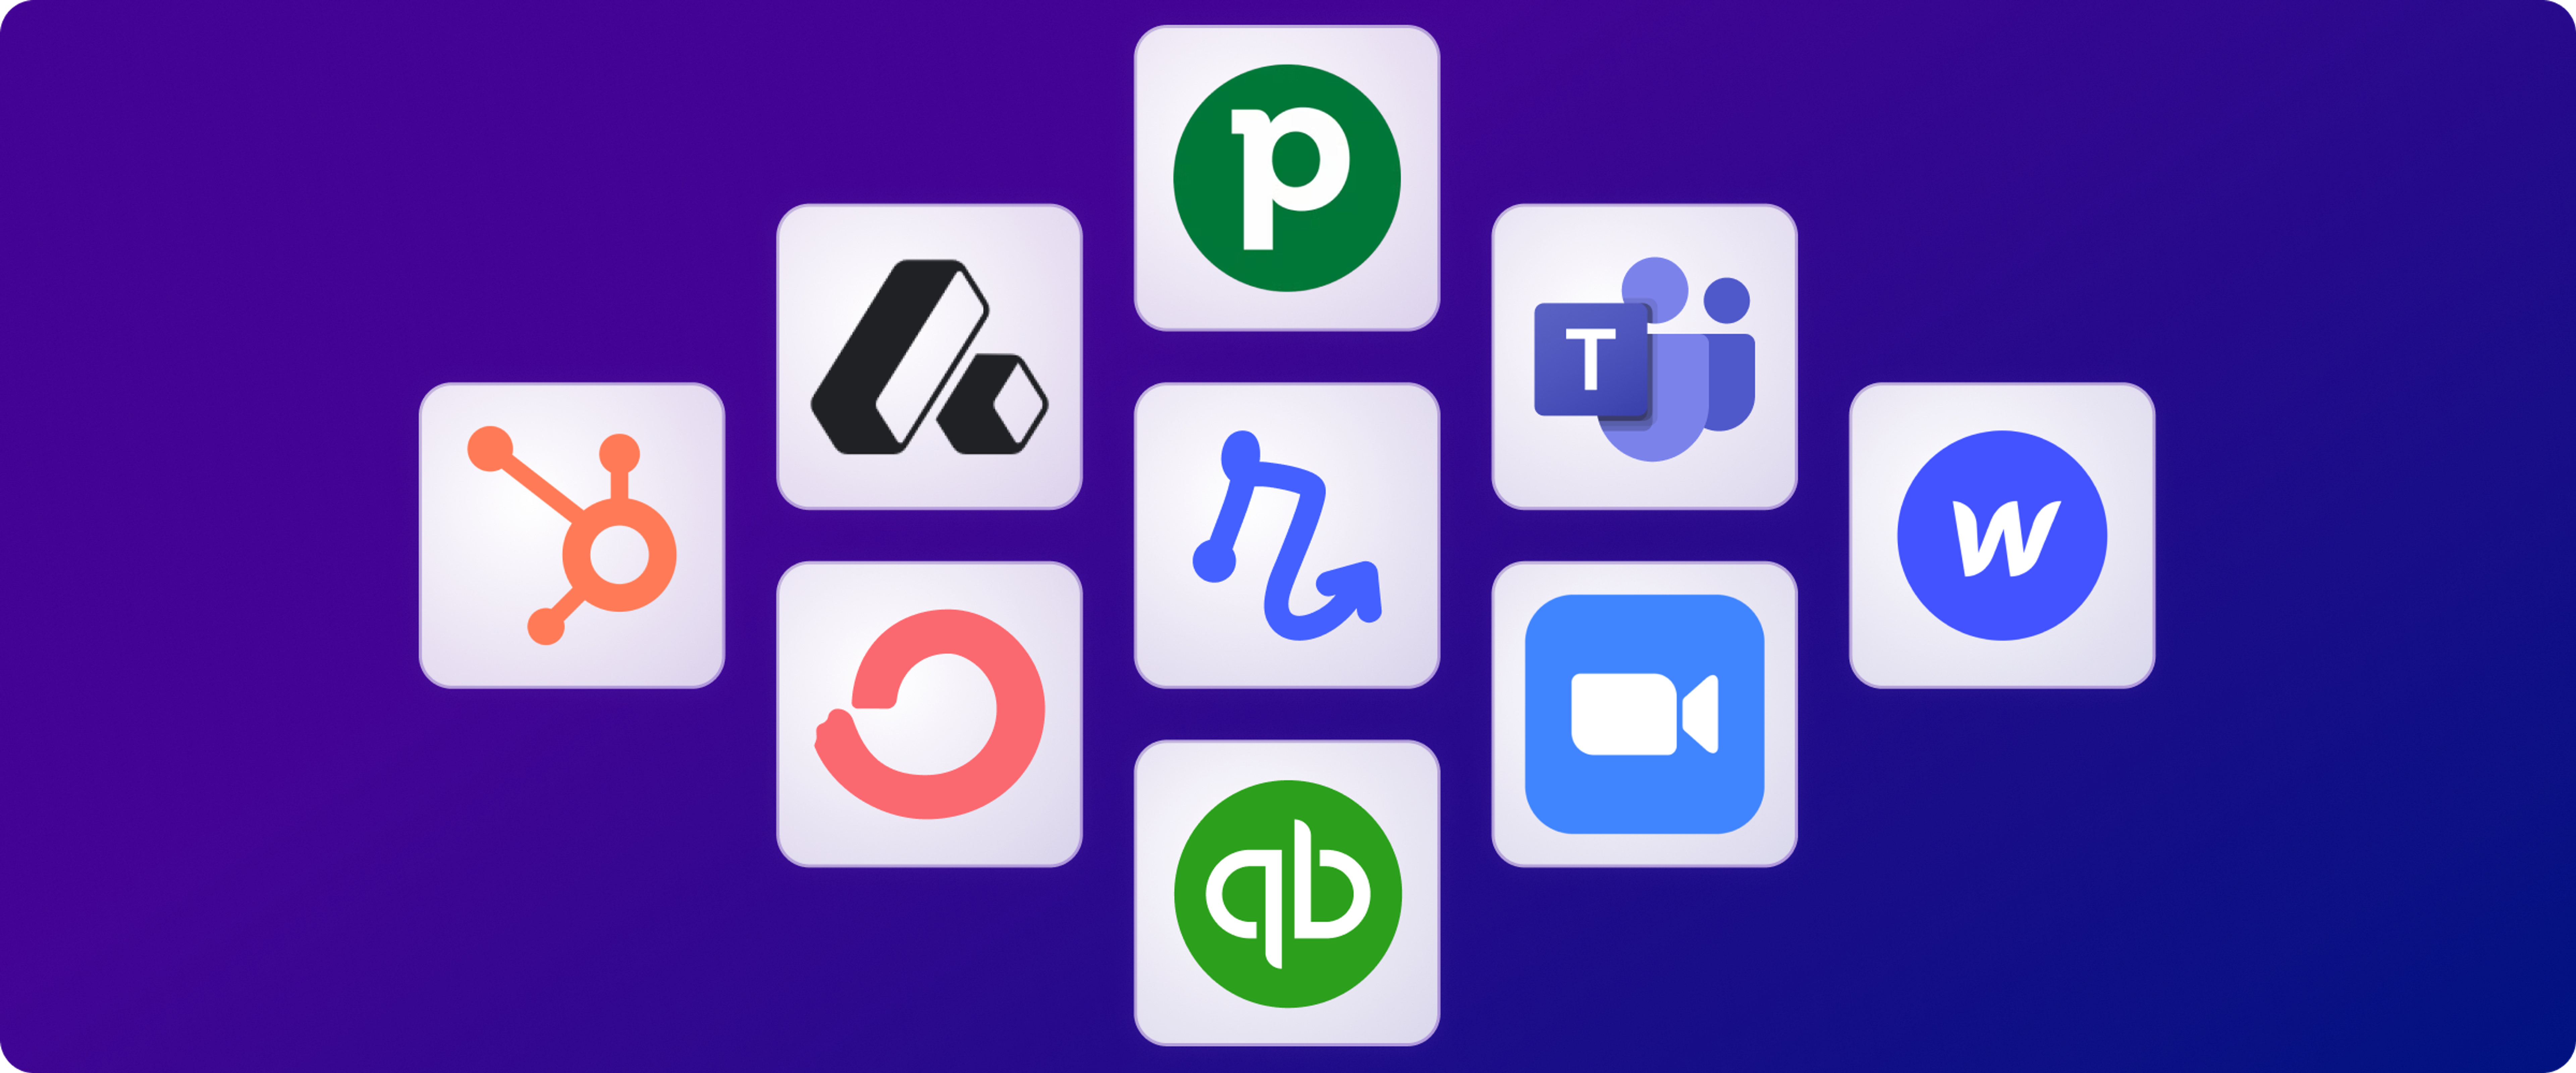 71 new integrations across 10 apps, including Microsoft Teams, Paddle, Attio, ConvertKit, Google Contacts, Google Drive, HubSpot, Pipedrive, Quickbooks Online, Webflow and Zoom